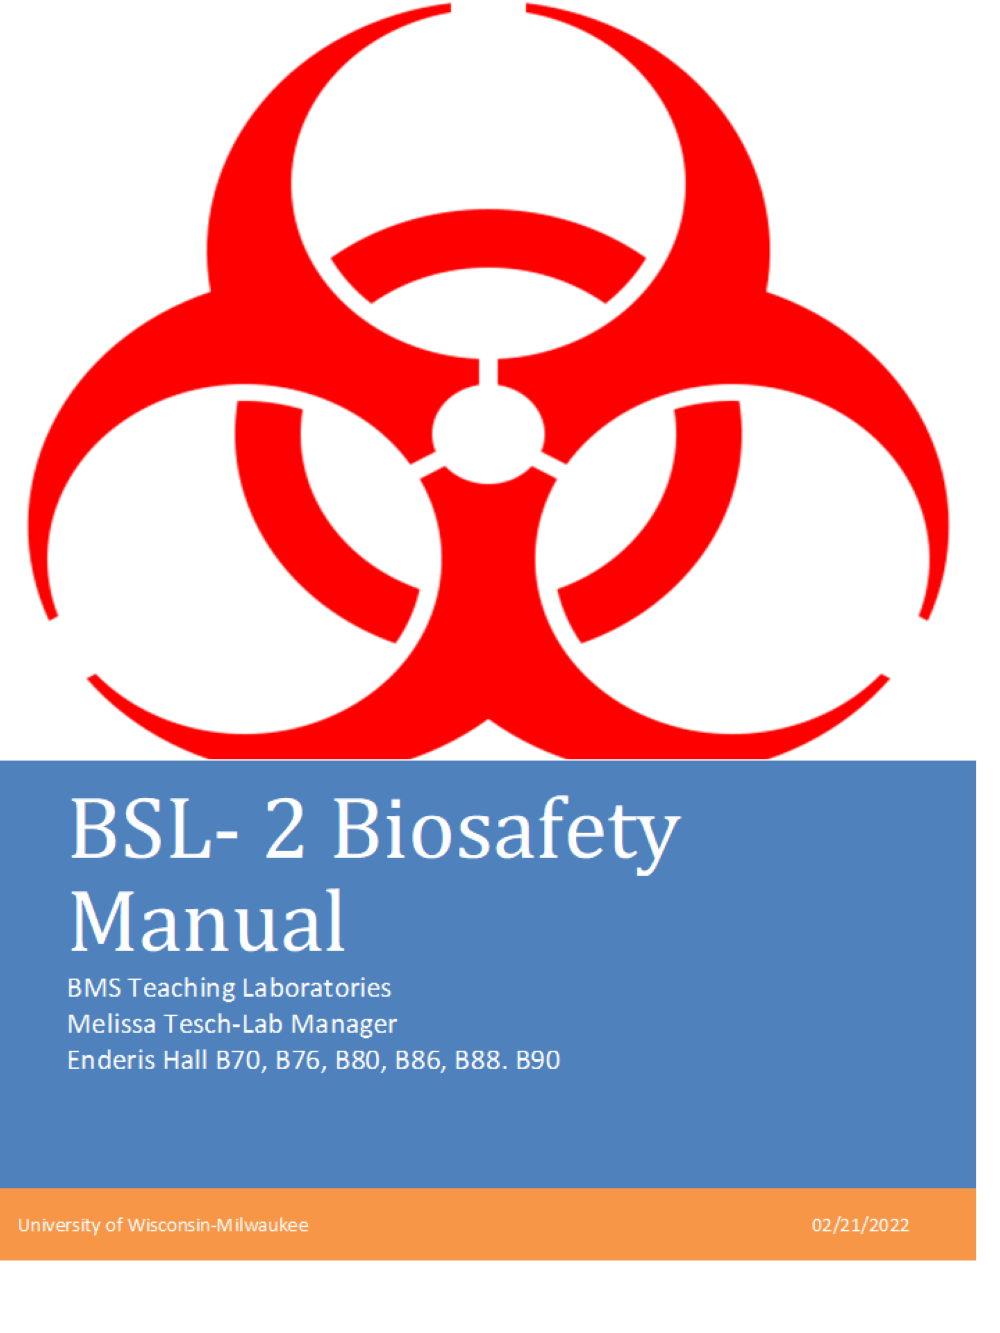 Biosafety Testing Services